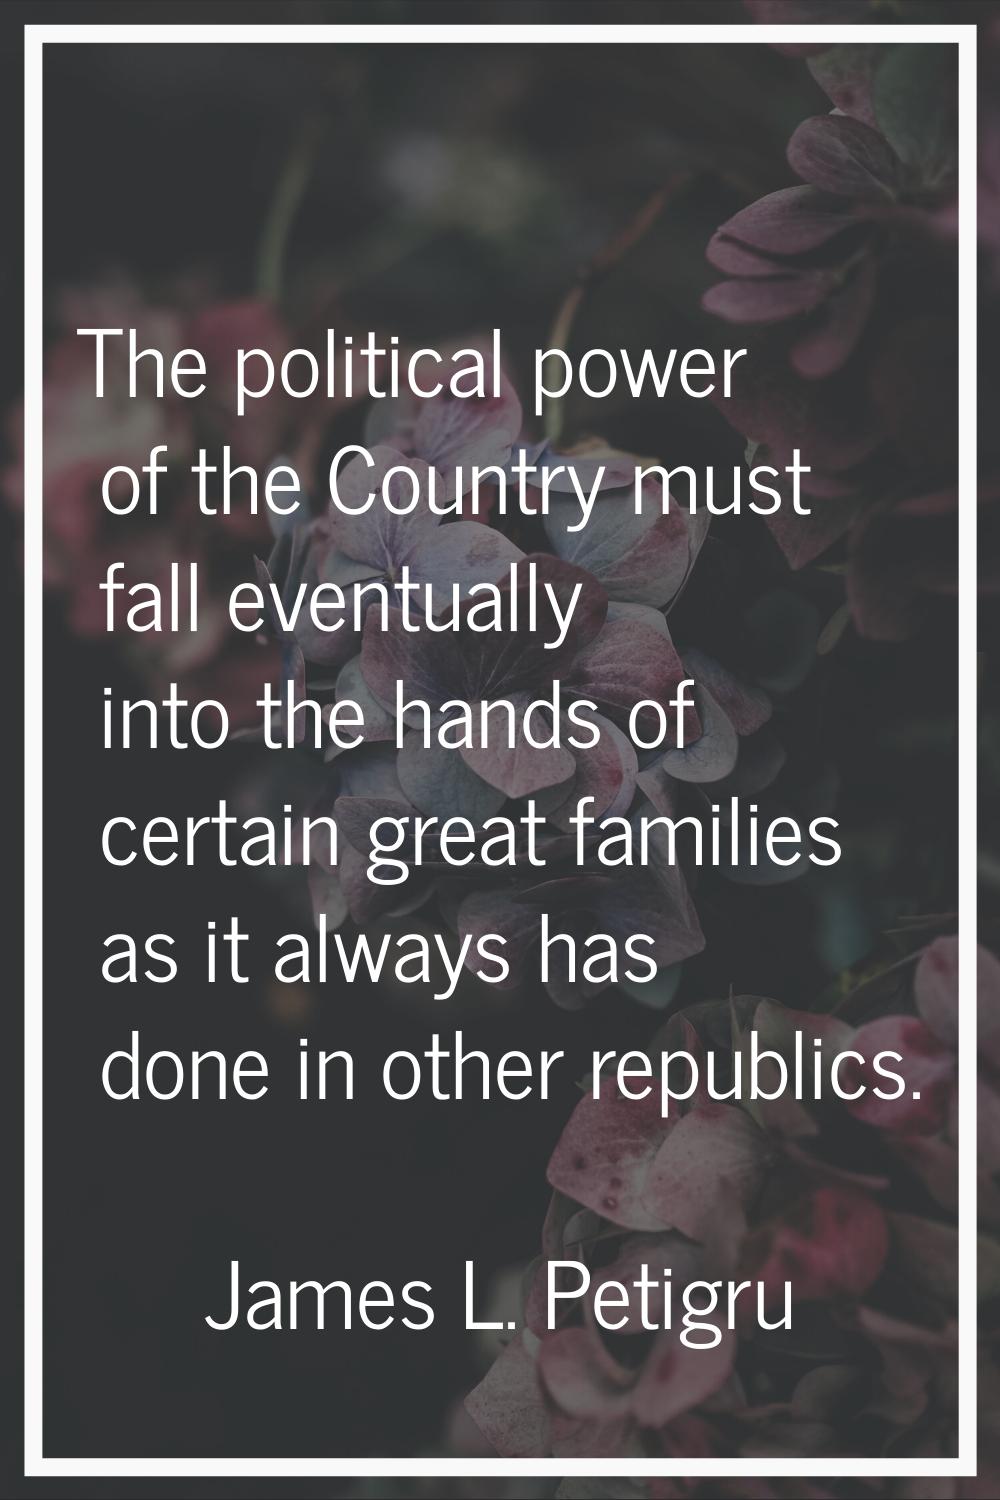 The political power of the Country must fall eventually into the hands of certain great families as